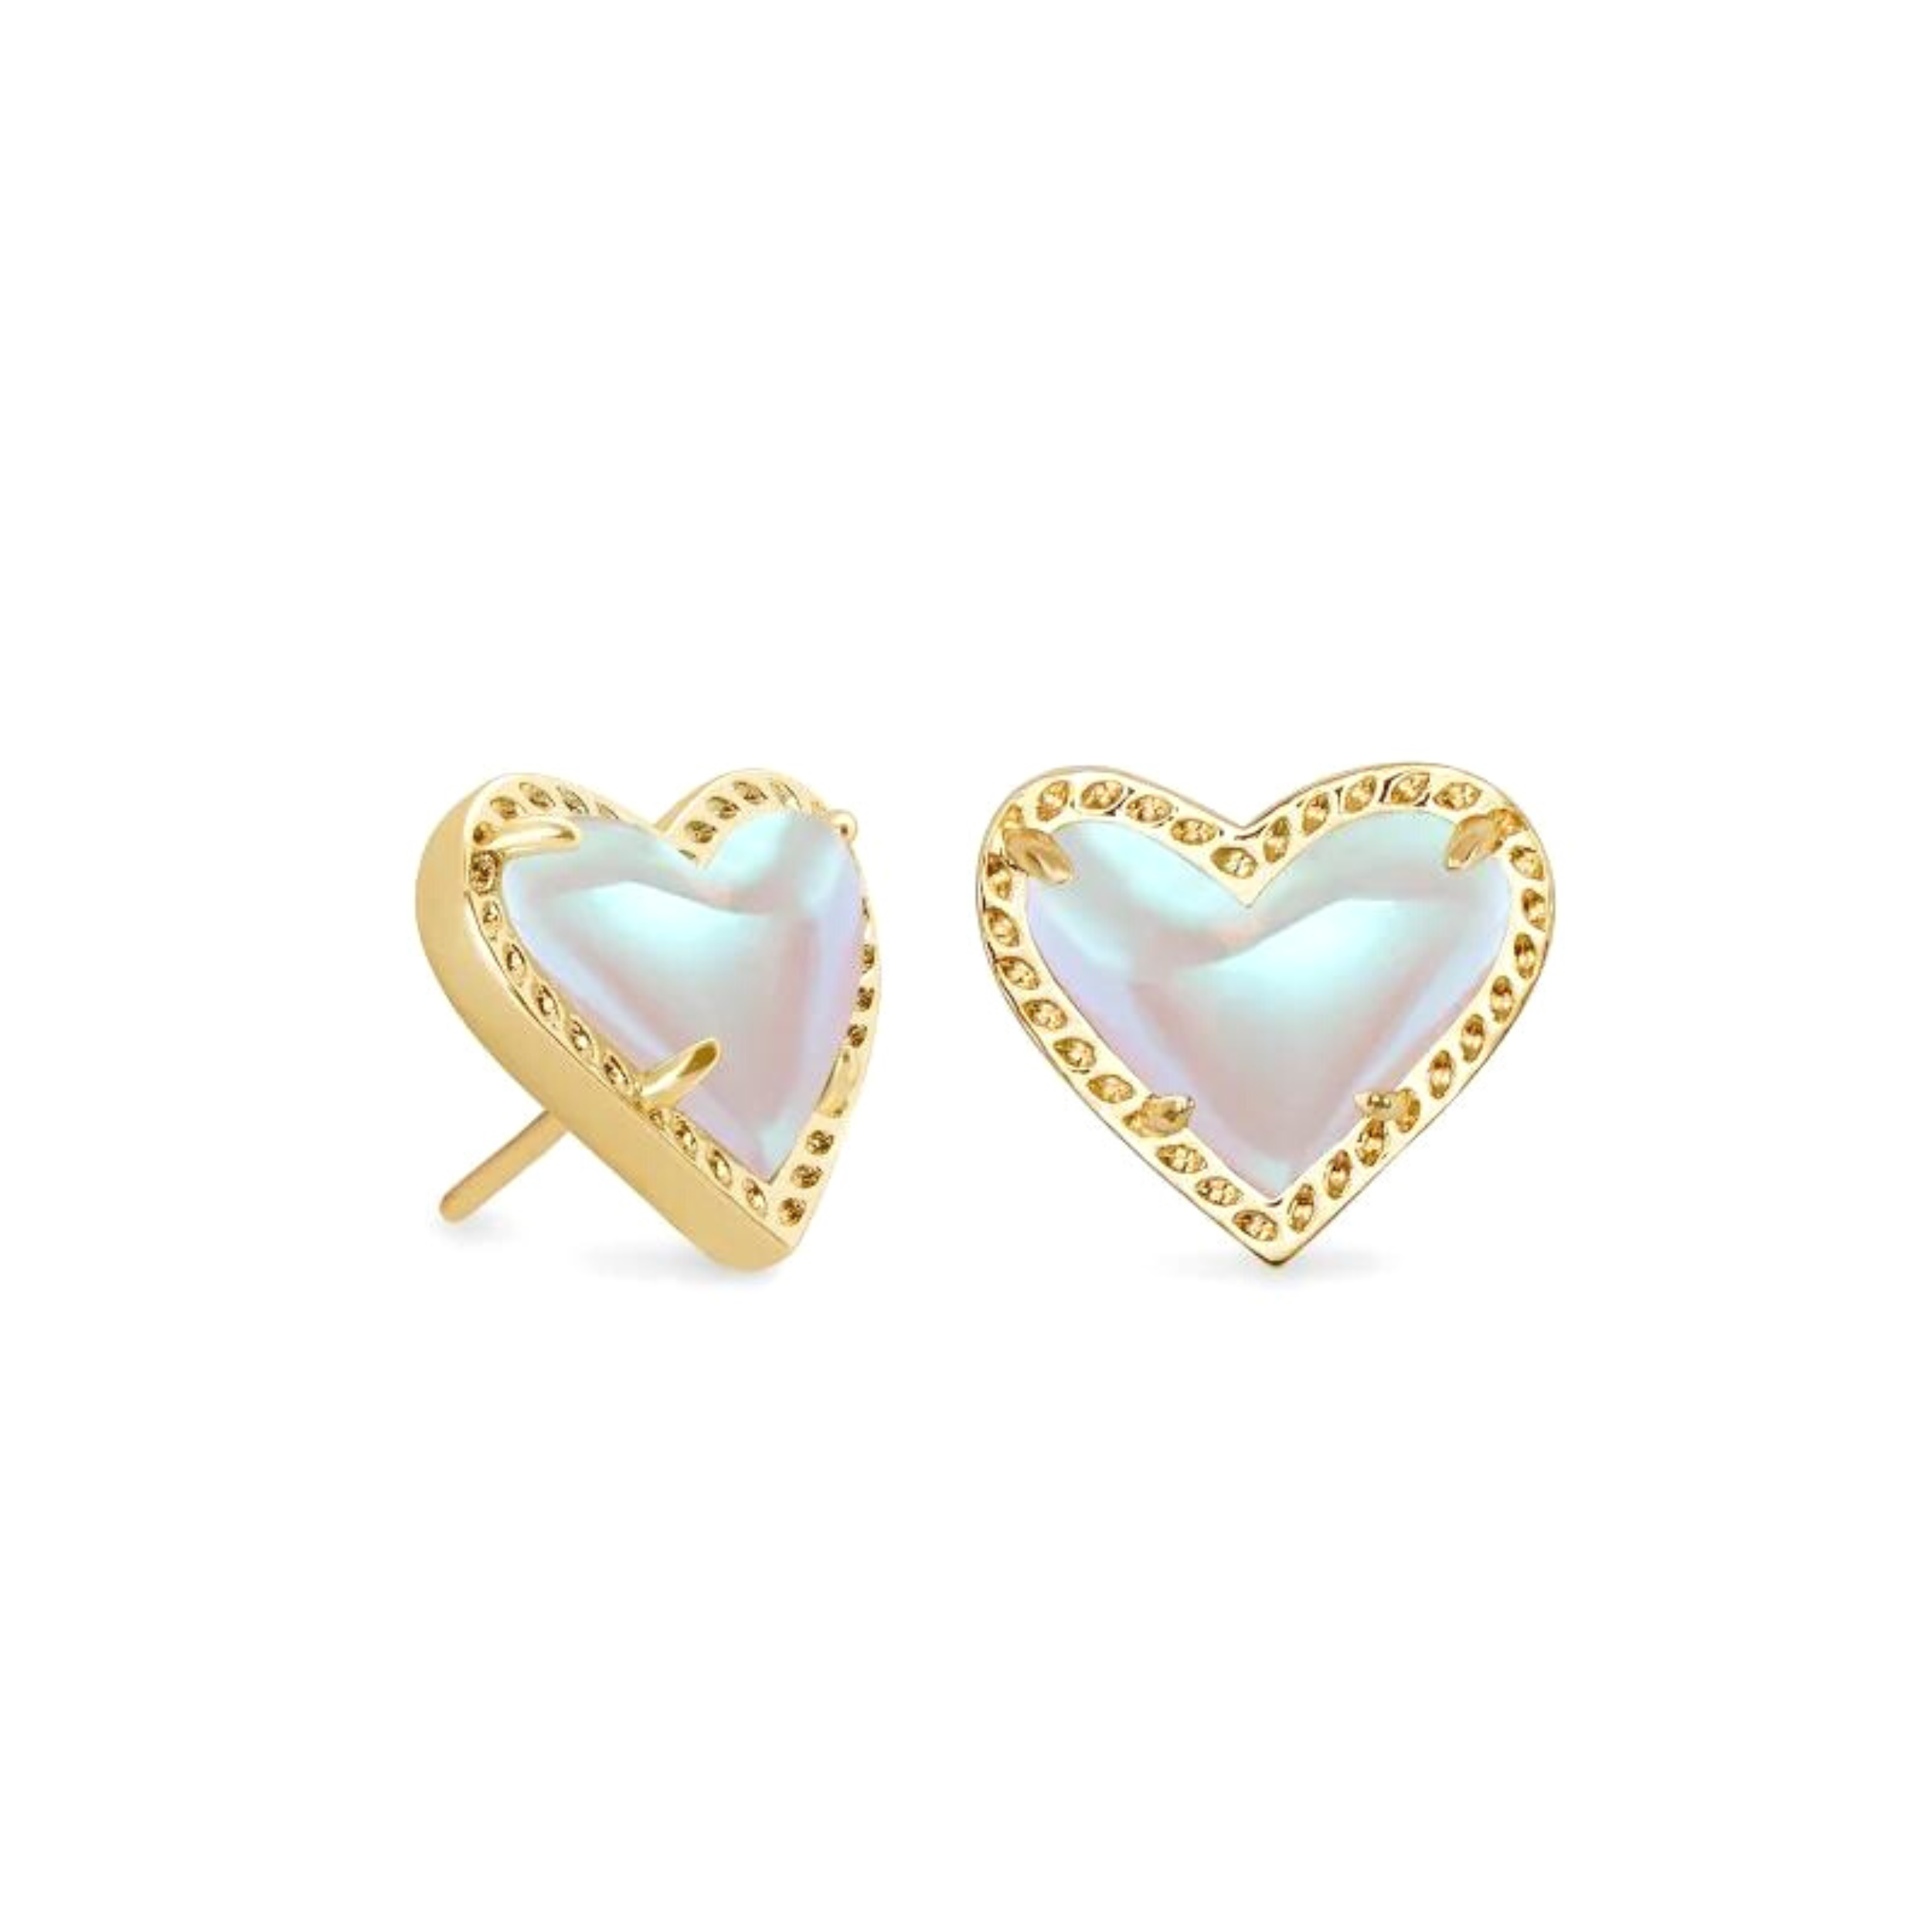 Kendra Scott | Ari Heart Gold Stud Earrings in Dichroic Glass - Giddy Up Glamour Boutique